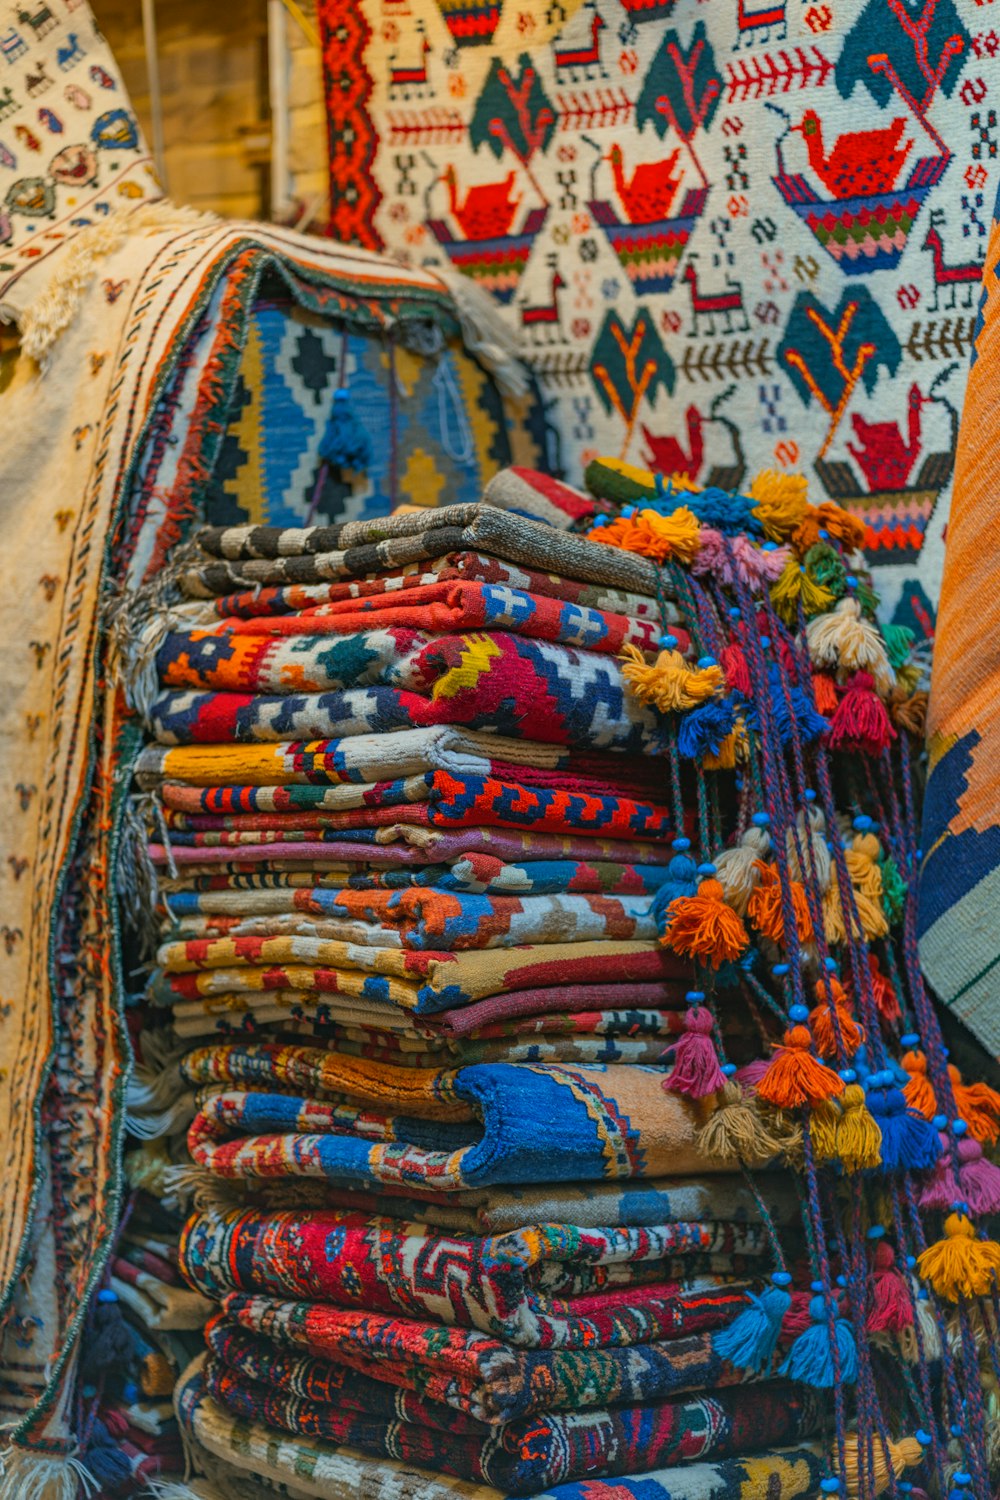 a pile of colorful fabrics on display in a store